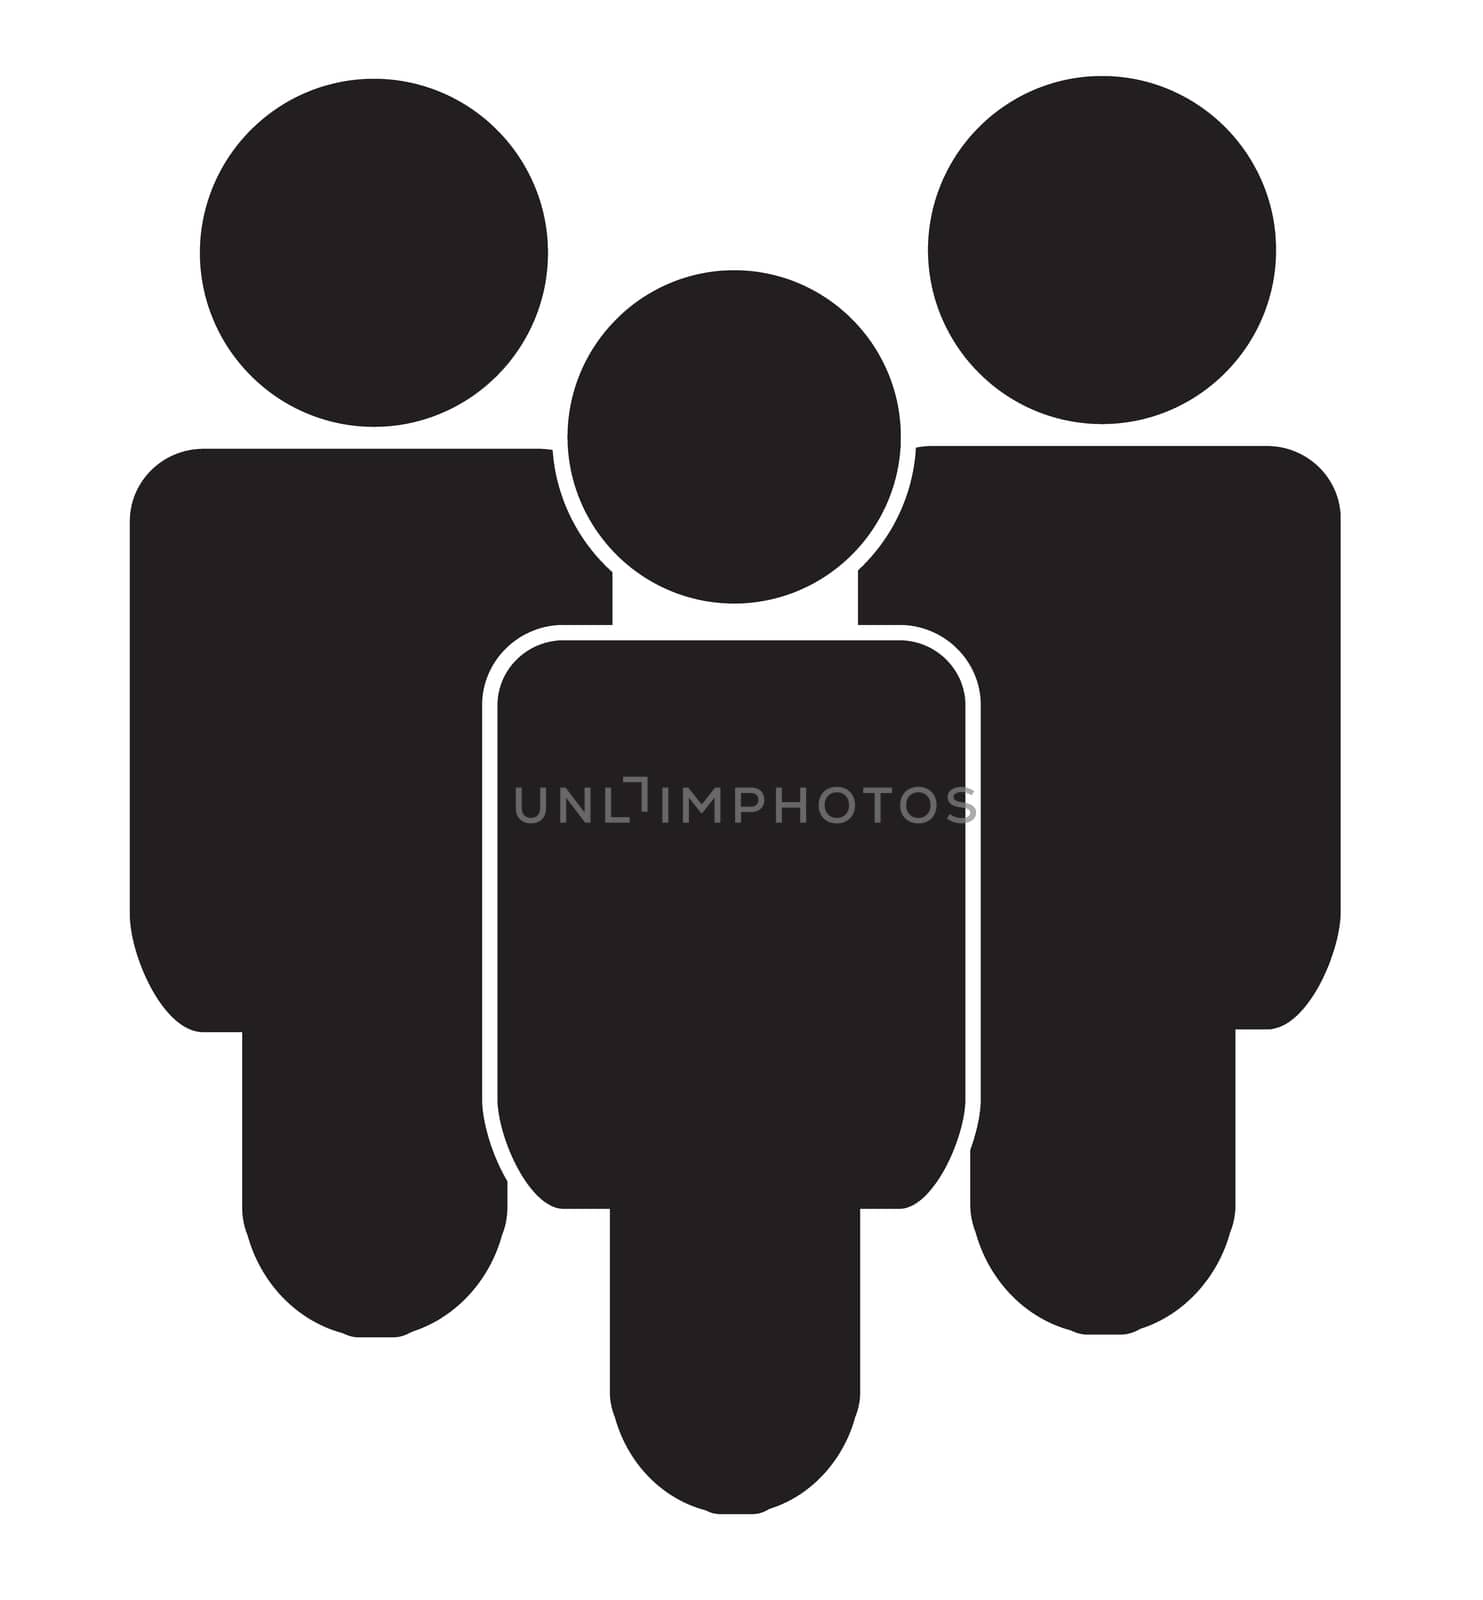 Gray Group People icon isolated. Modern simple flat team male sign. Trendy network human profile symbol for website design.